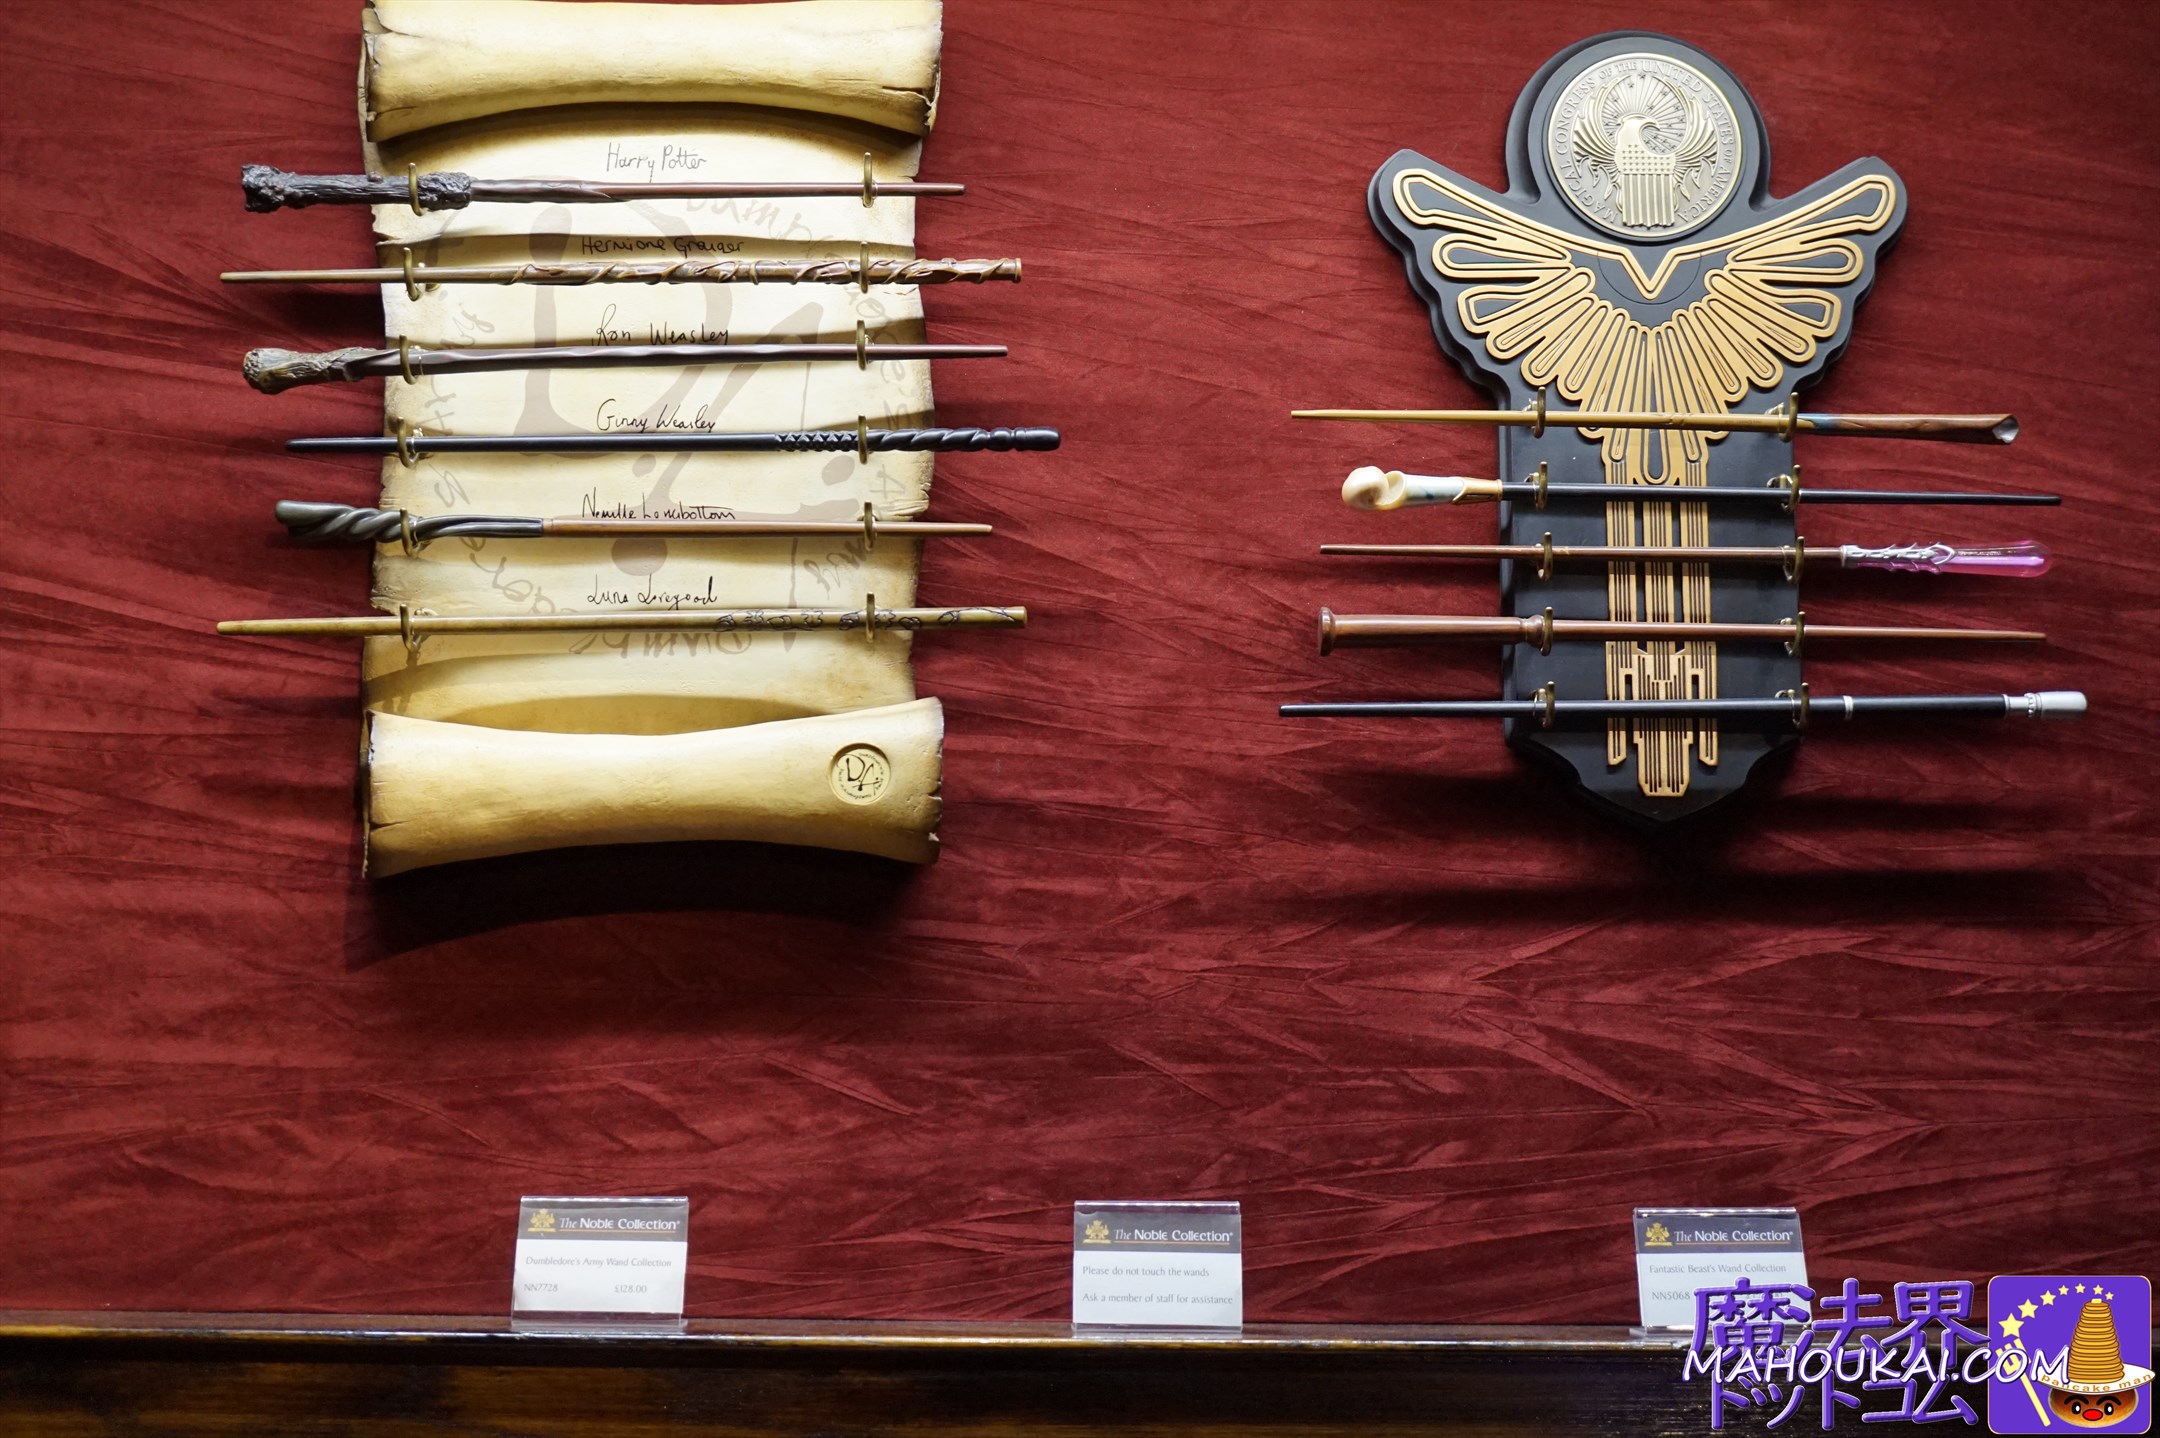 Dumbledore's Army Wand Collection NN7728 Price £128 The Noble Collection Covent Garden Shop, Harry Potter replica collectibles, London.